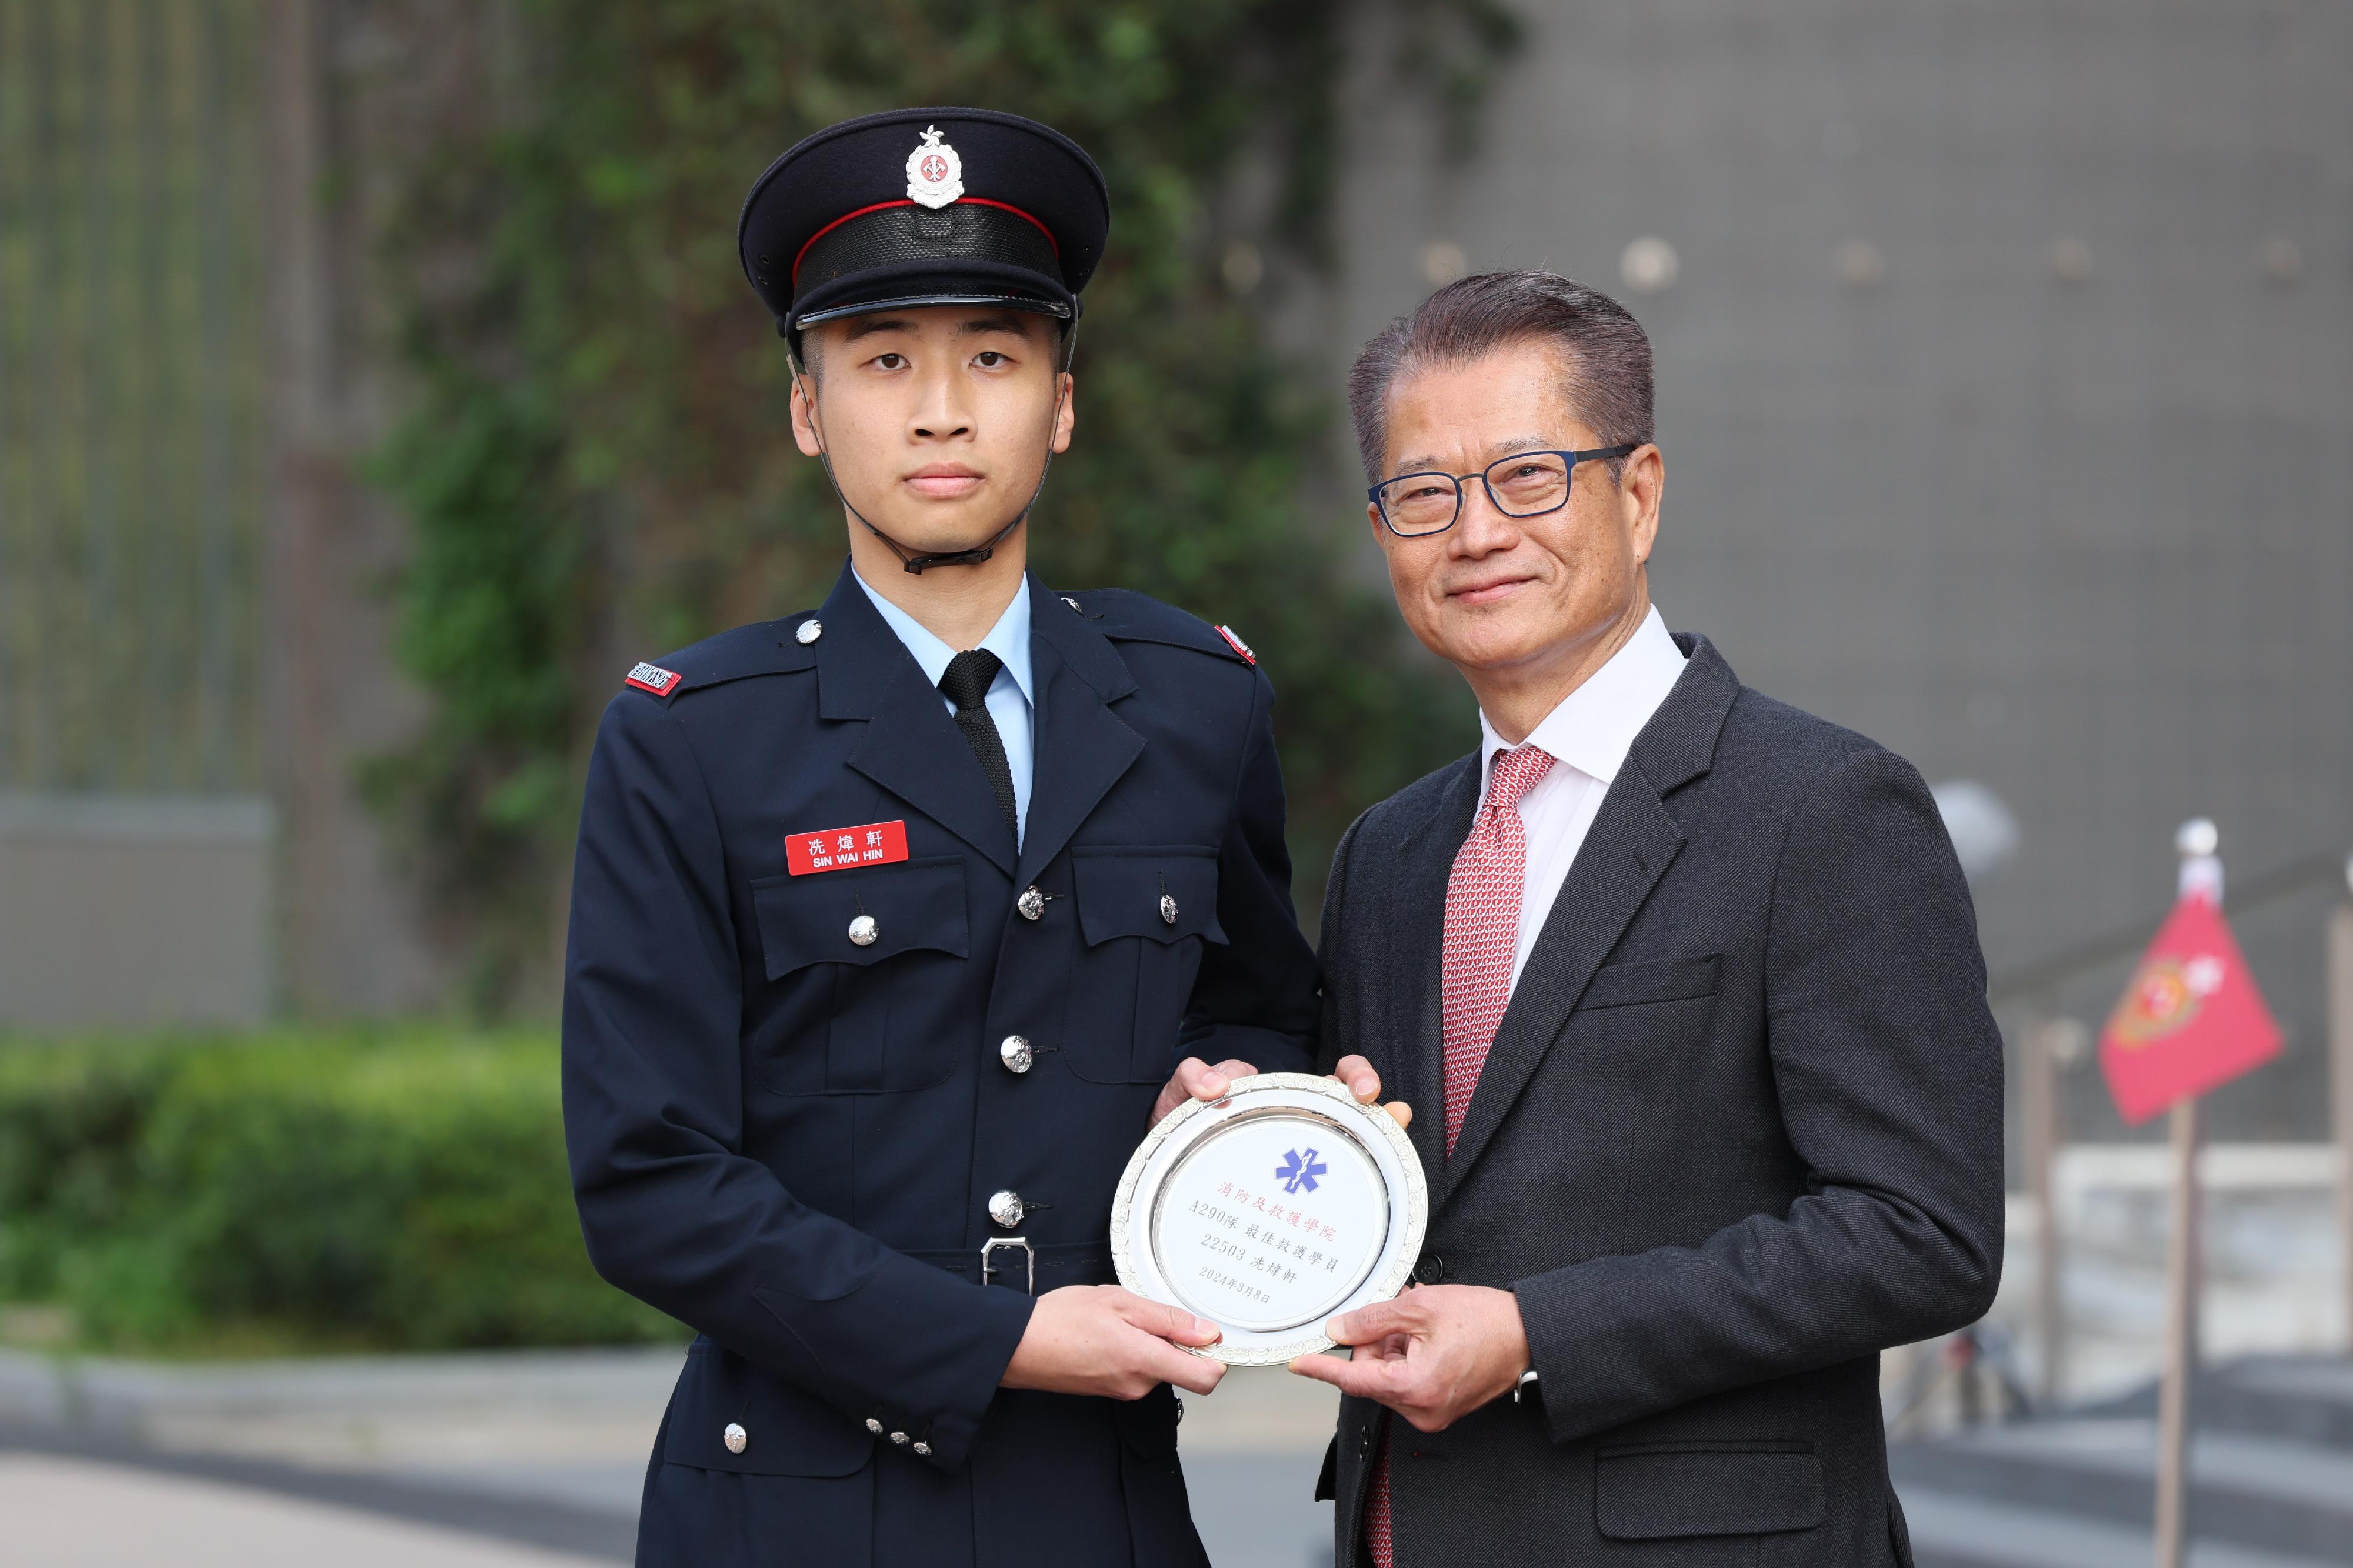 The Financial Secretary, Mr Paul Chan, reviewed the Fire Services passing-out parade at the Fire and Ambulance Services Academy today (March 8). Photo shows Mr Chan (right) presenting the Best Recruit Ambulanceman award to a graduate.
